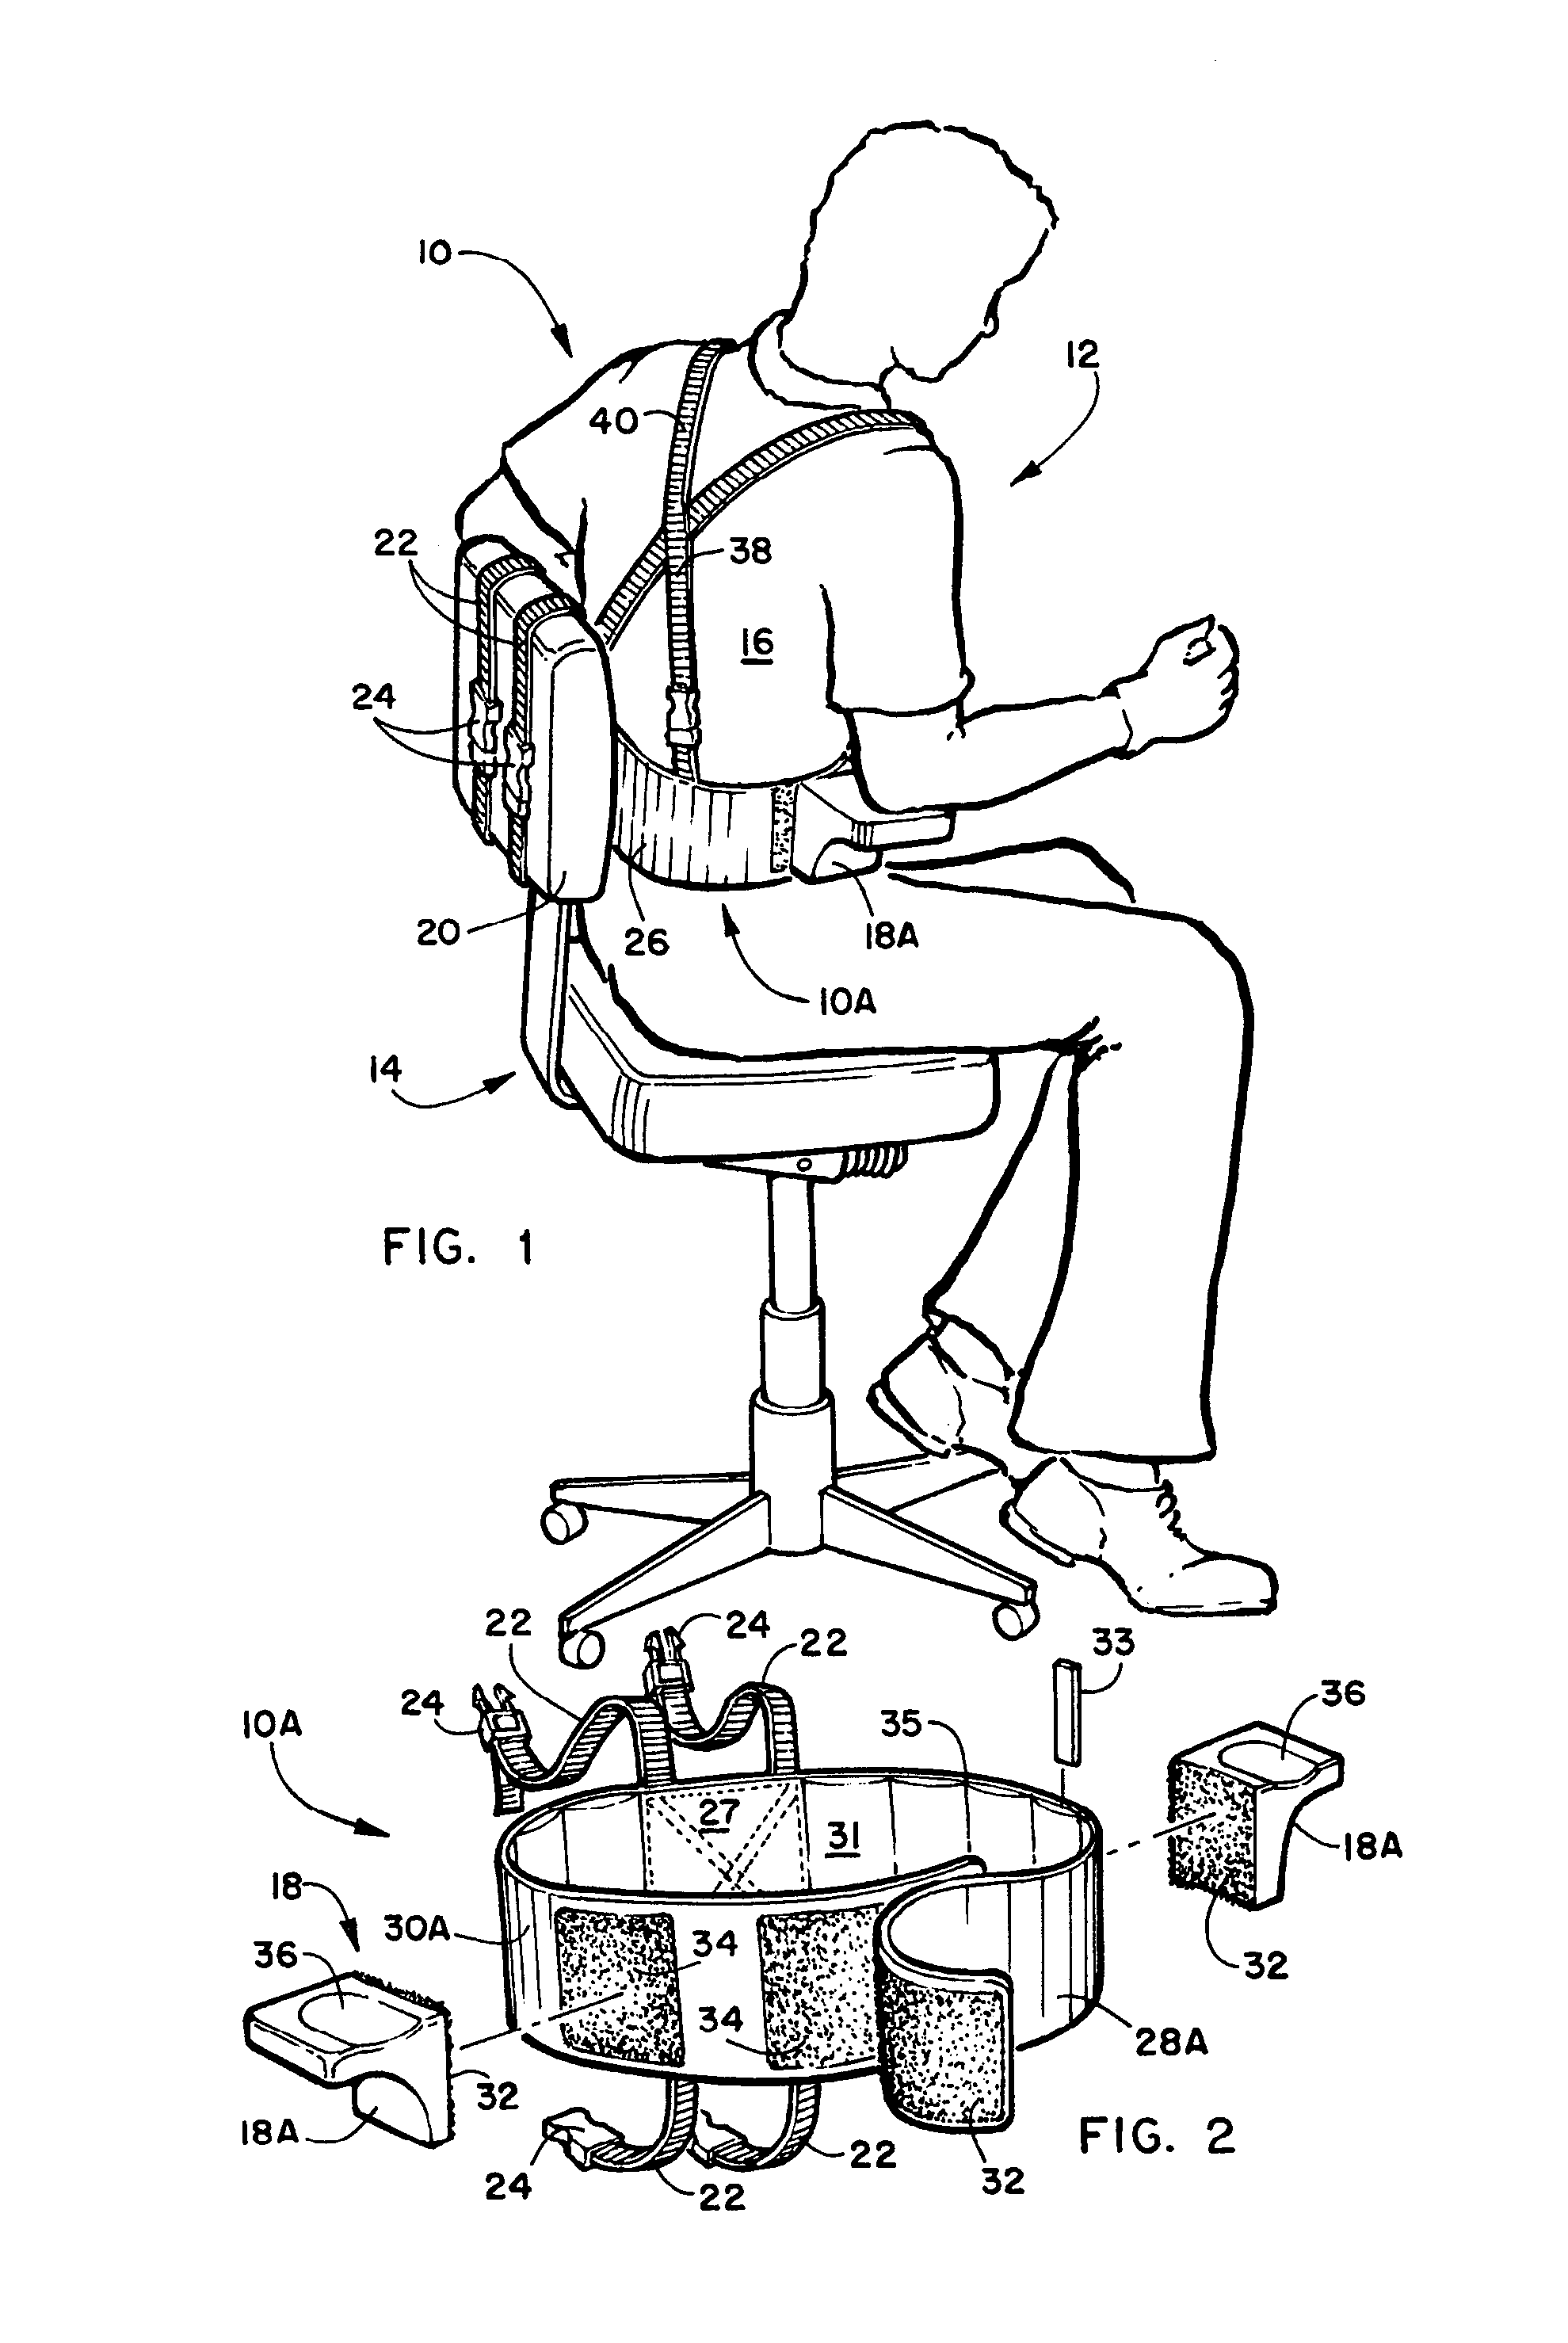 Chair mounted back support system